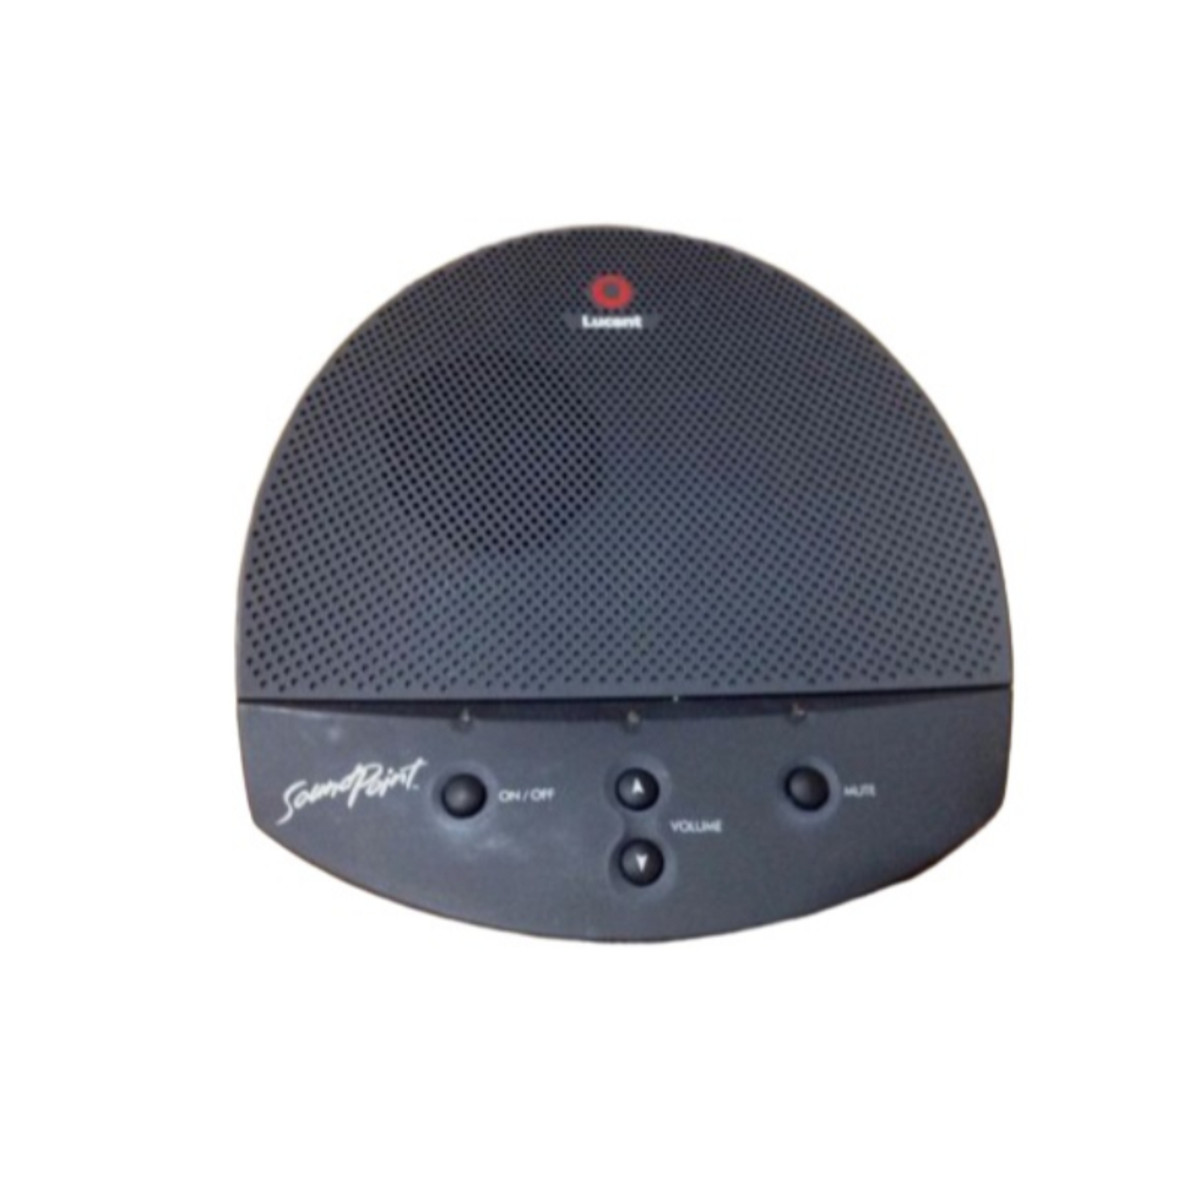 Lucent SoundPoint Office Speakerphone for Analog Phones (p/n-  2301-02900-001)